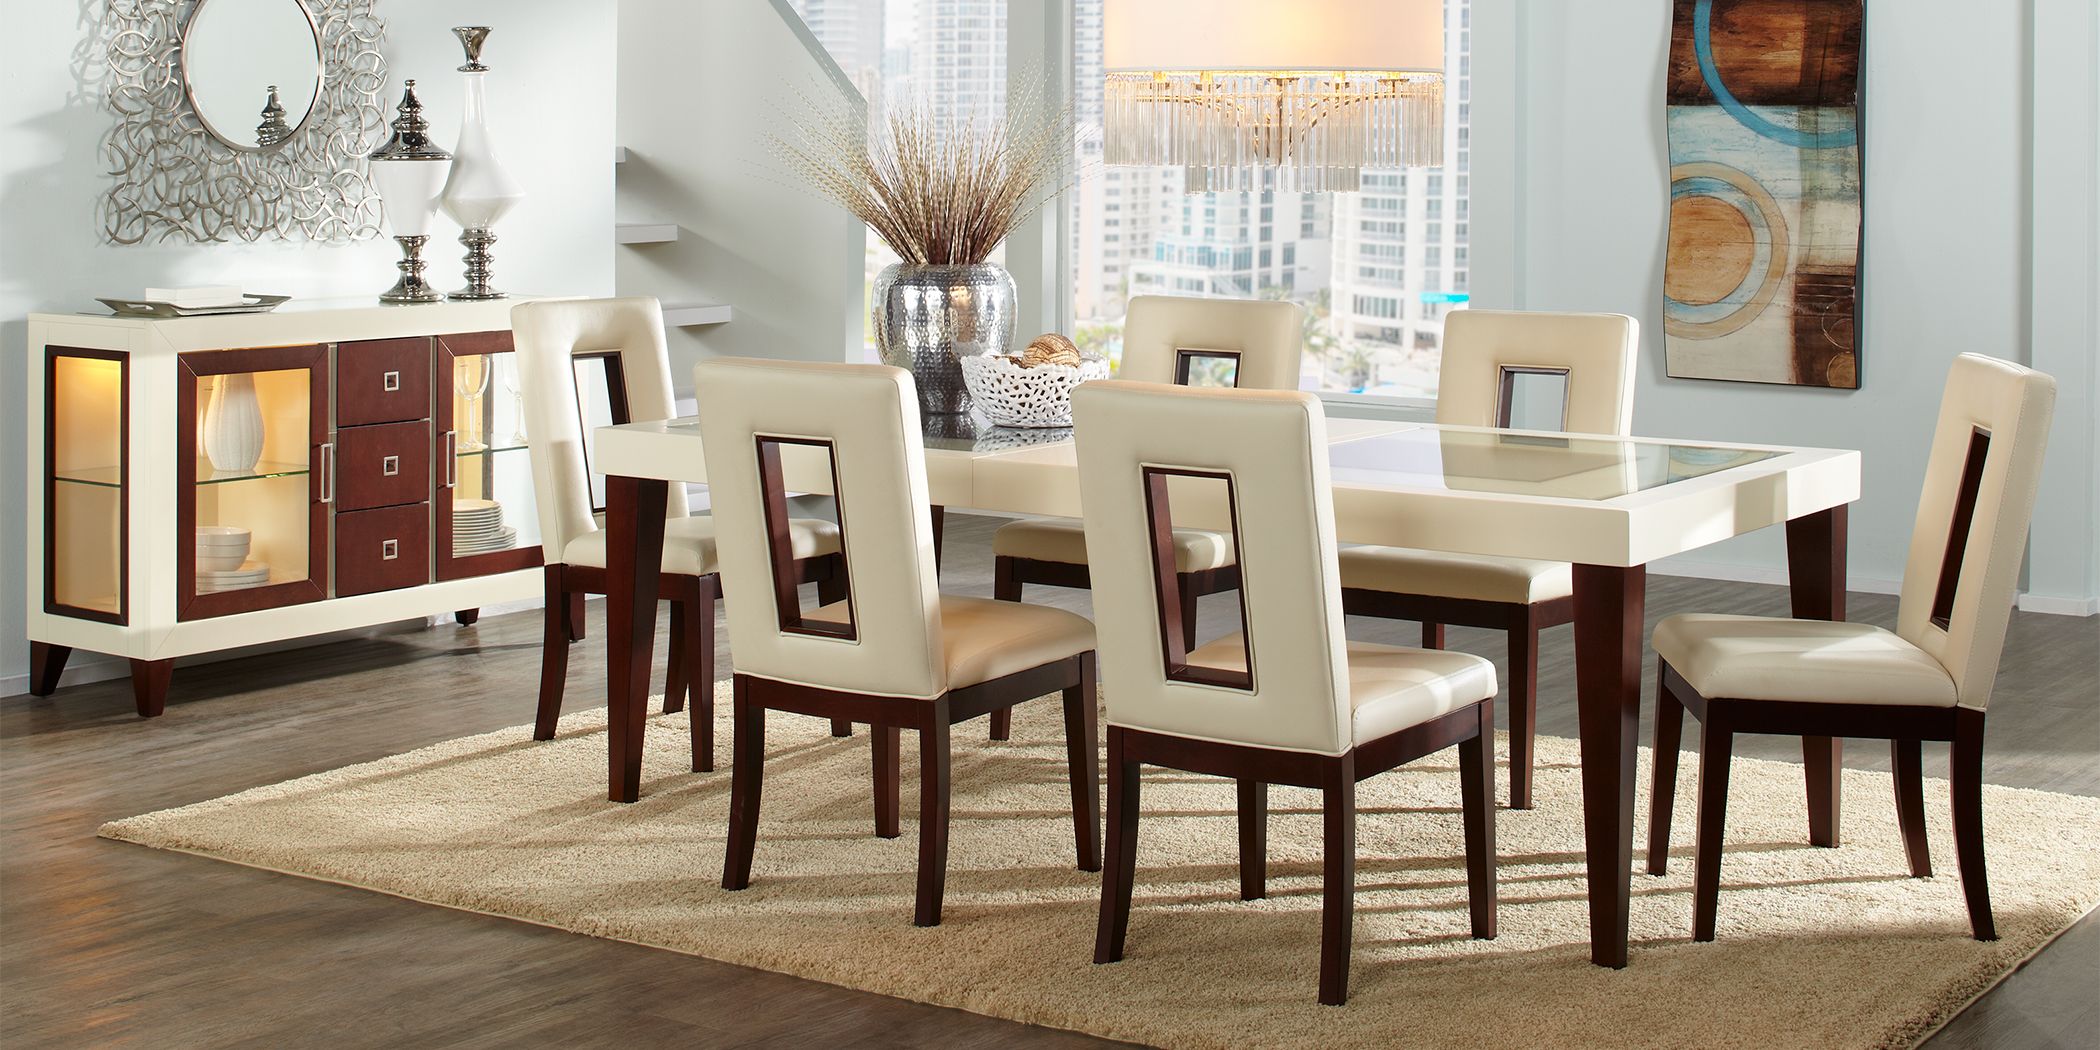 Https Wwwroomstogocom Furniture Product Sofia Vergara Savona Ivory 5 Pc Rectangle Dining Room With Open Back Chairs 4297204P